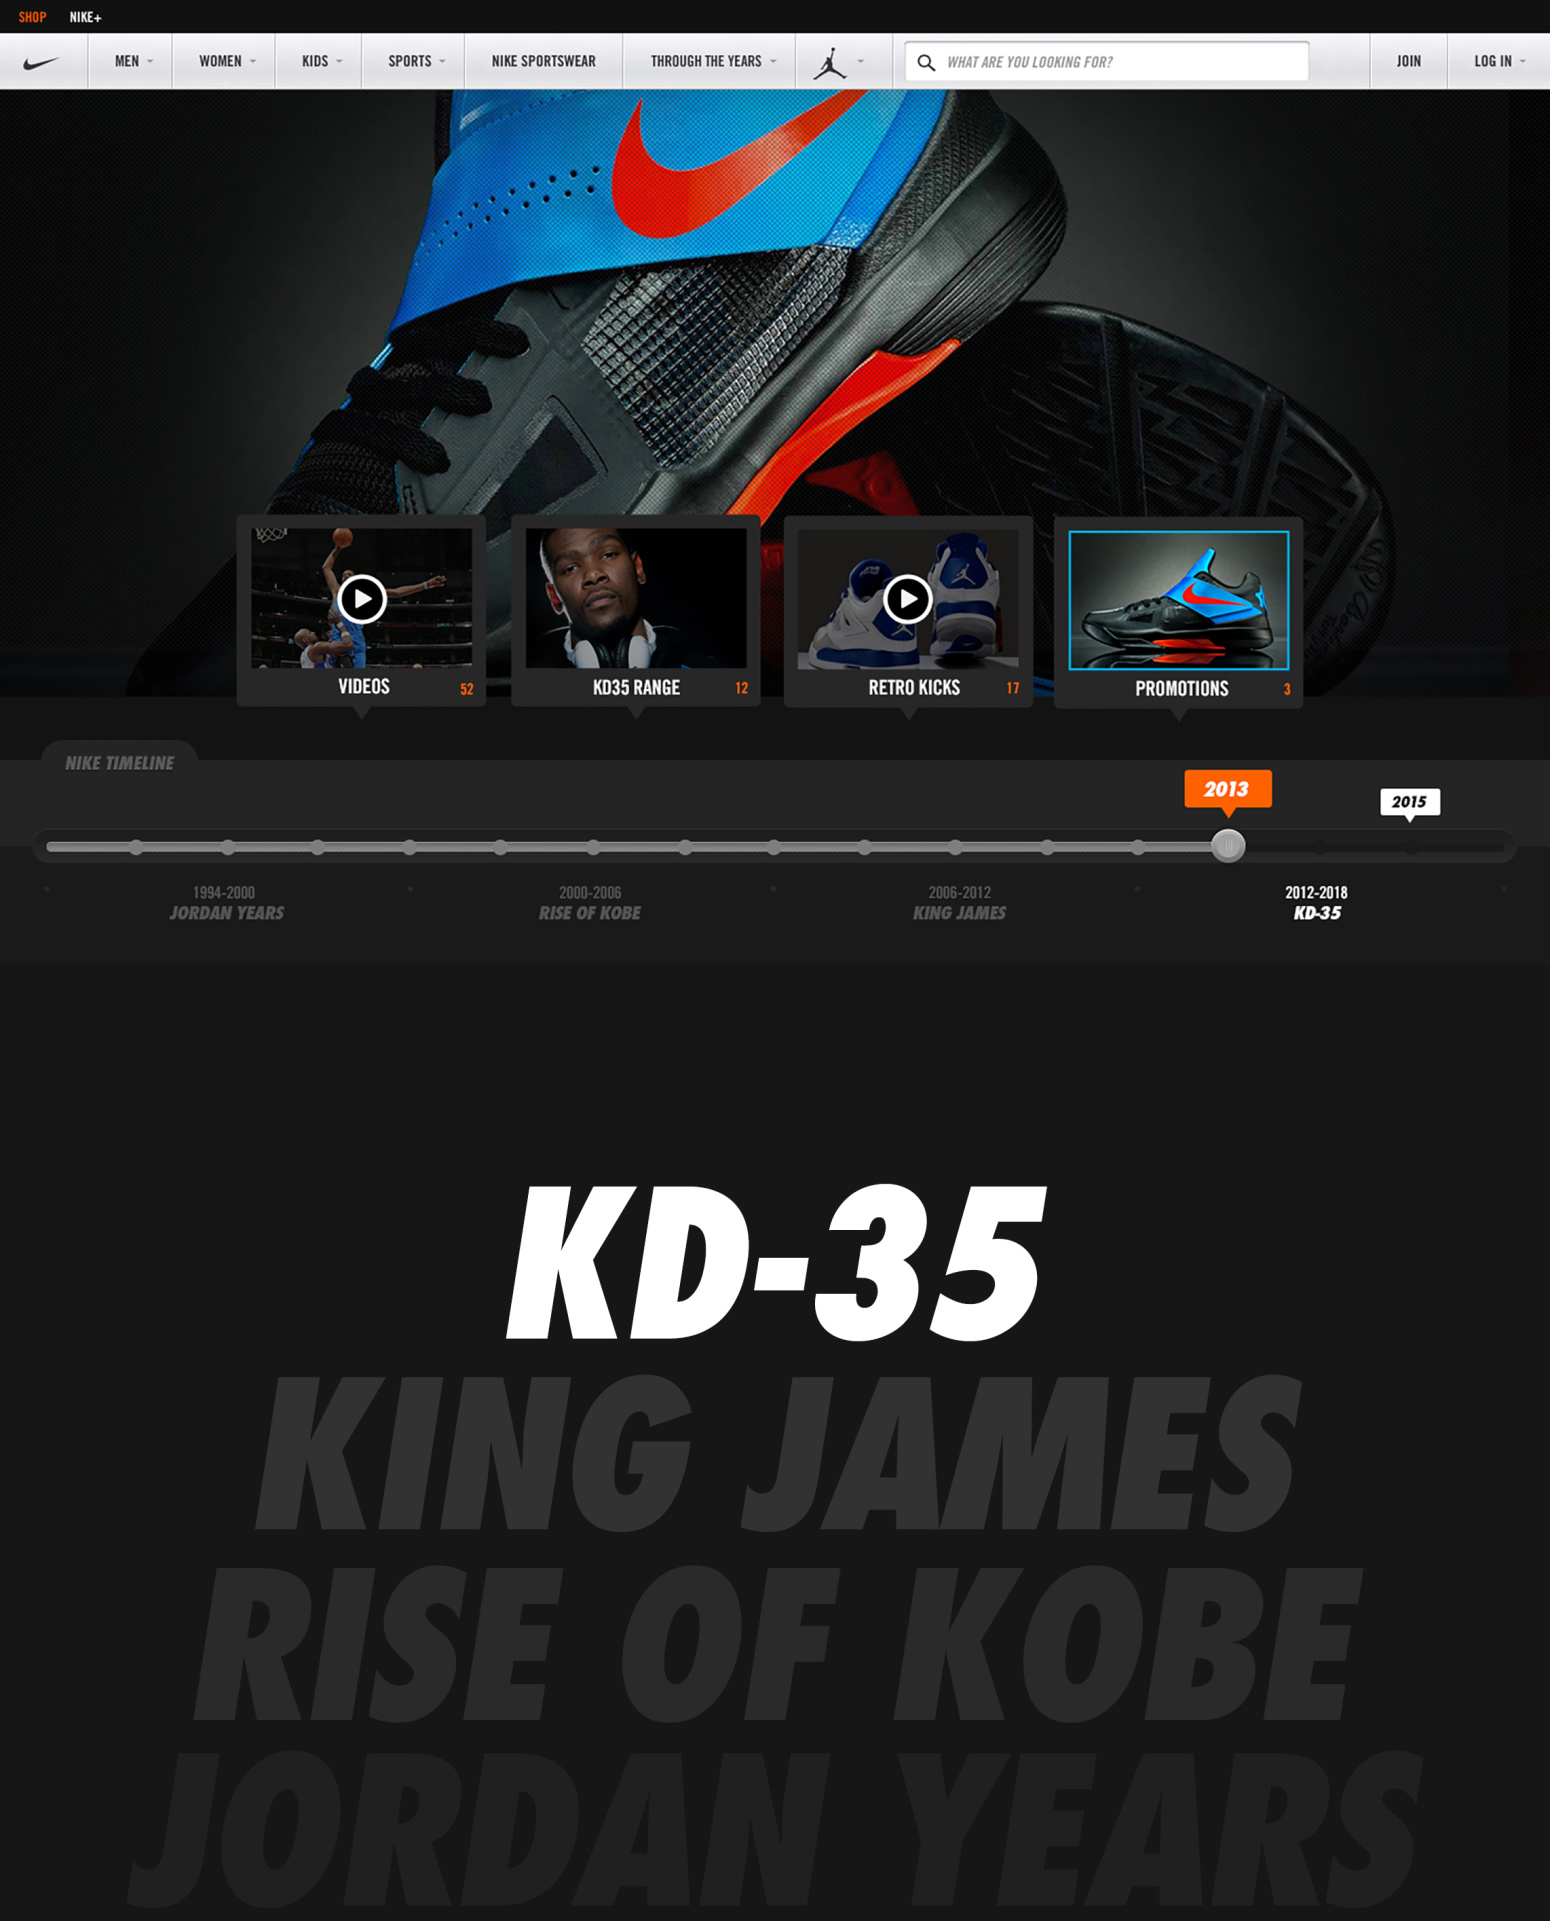 Nike Basketball product promotion kevin durant website